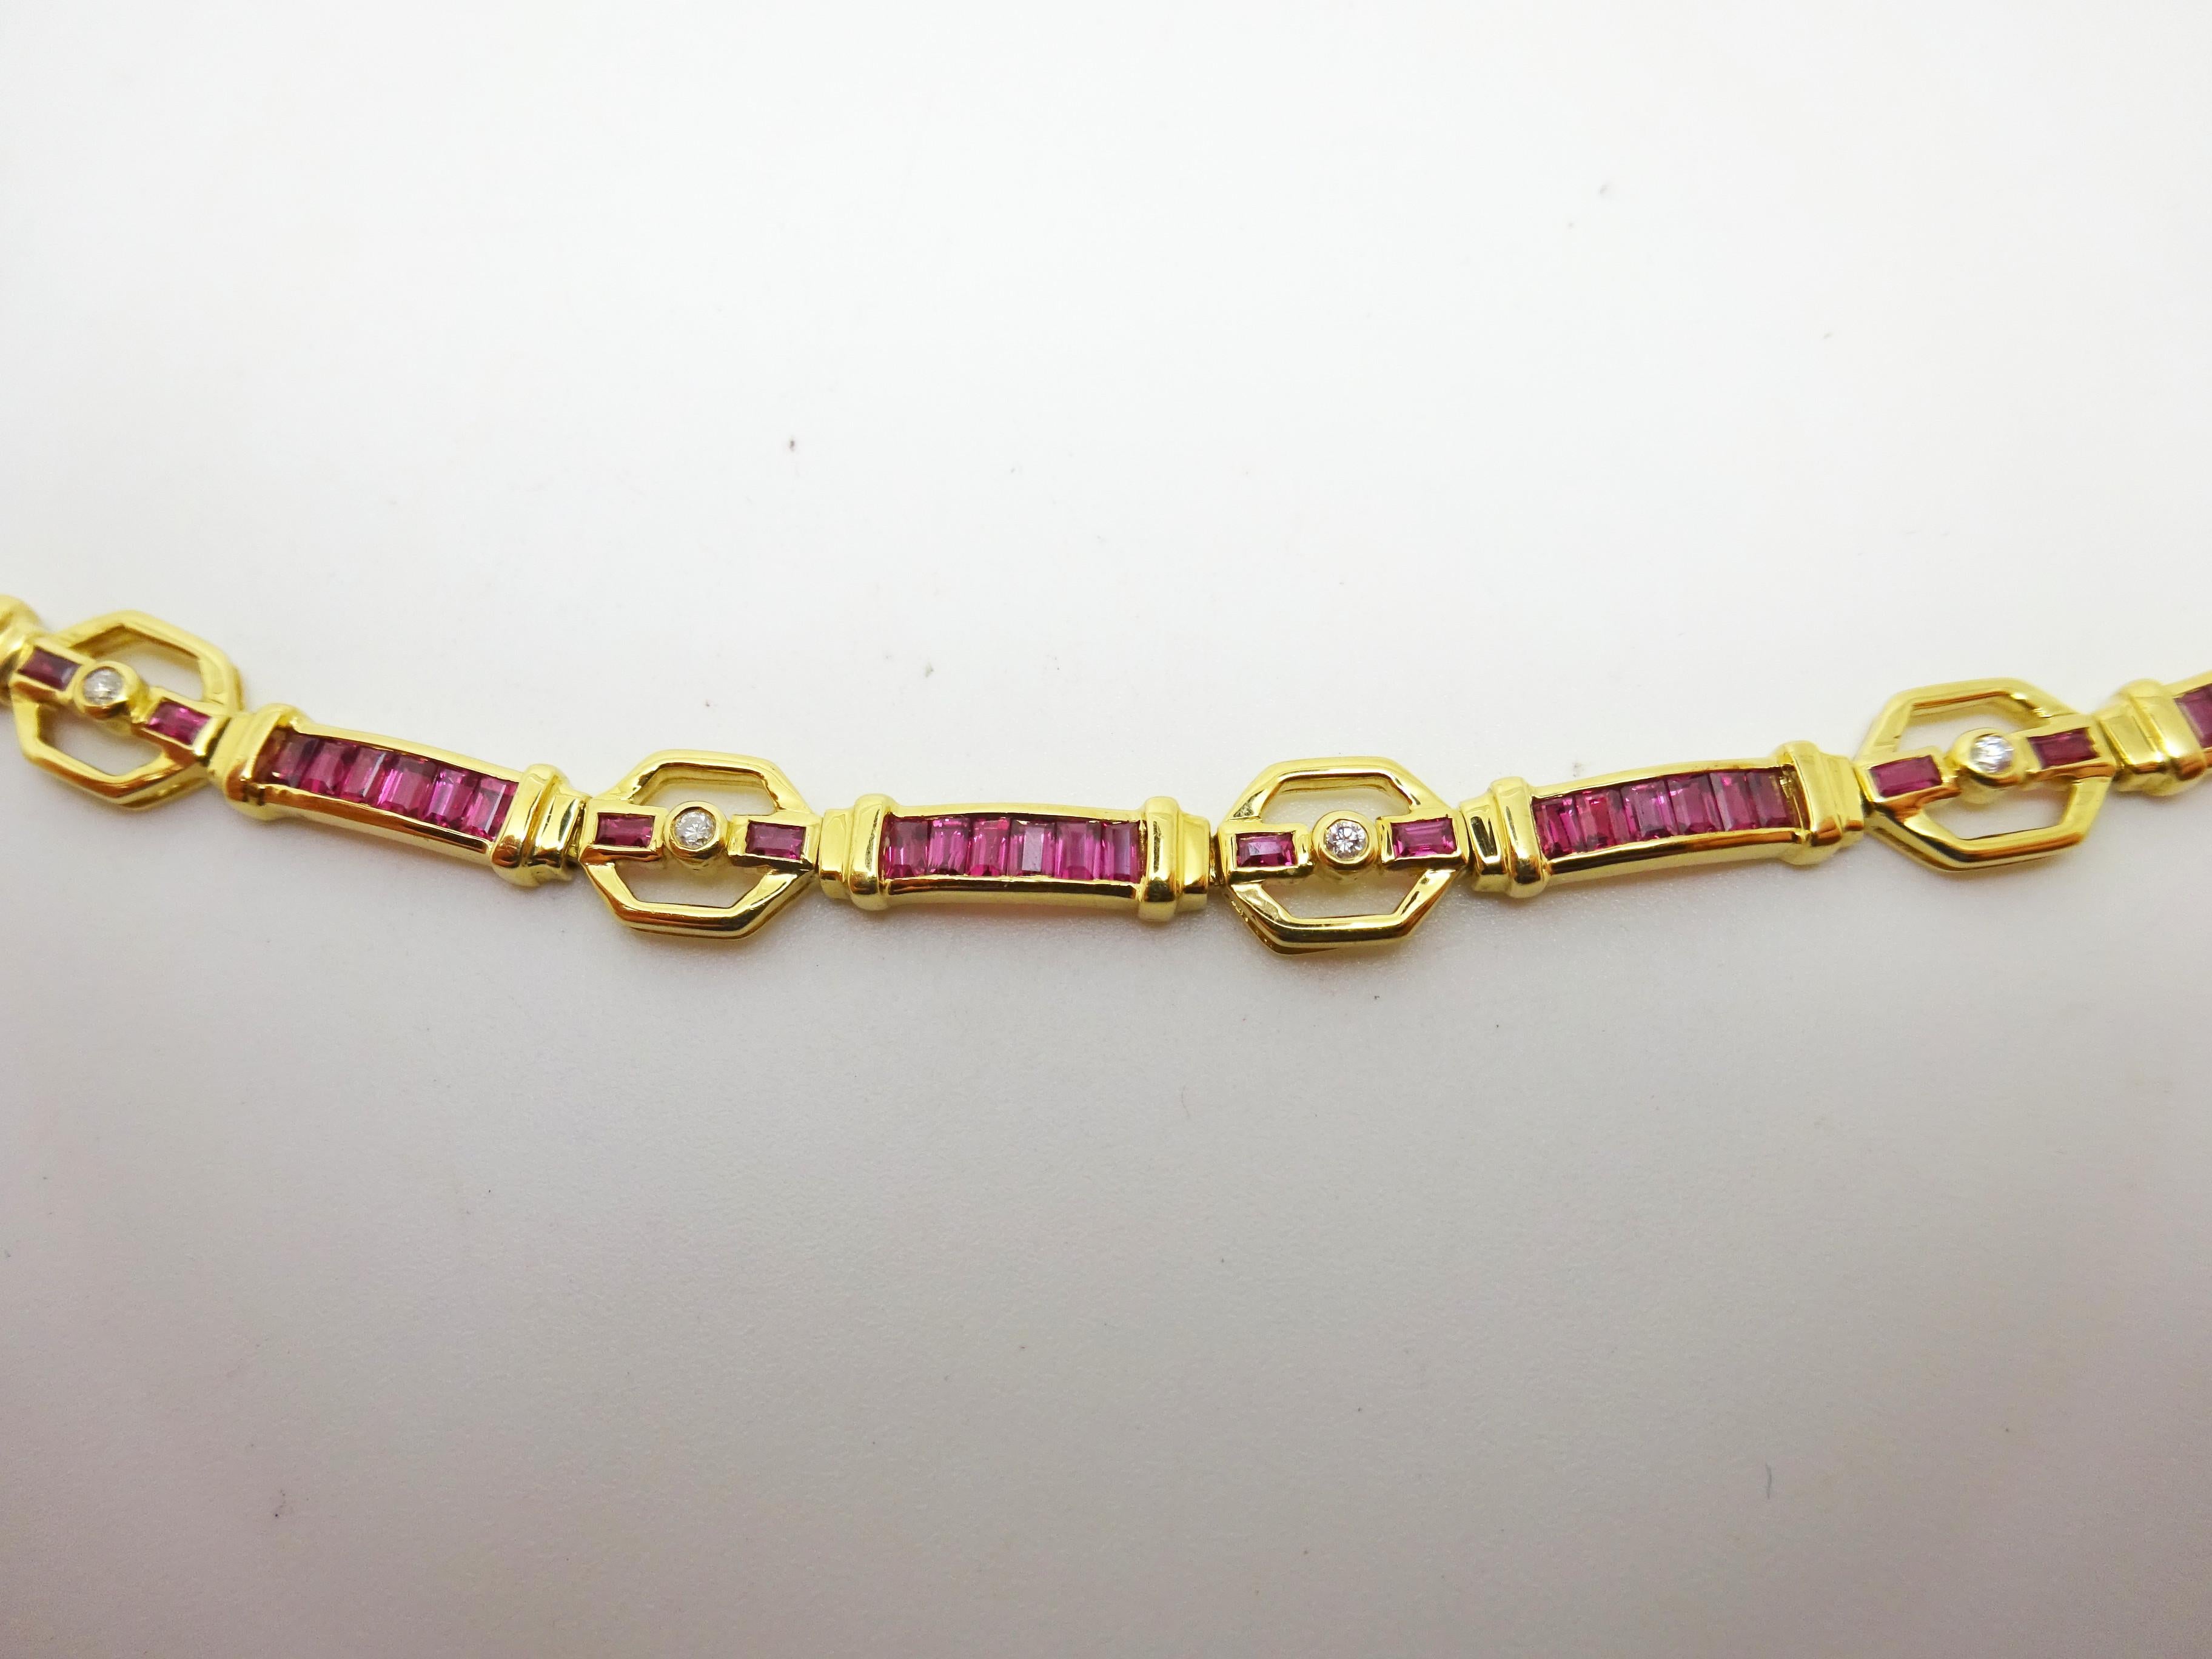 18k Yellow Gold 3 Carat Genuine Natural Ruby and Diamond Bracelet (#J3326)
18k yellow gold ruby and diamond bracelet featuring sixty-four rectangular step cut earth mined pinkish red rubies. The rubies are channel set and weigh 2.91 carats total.